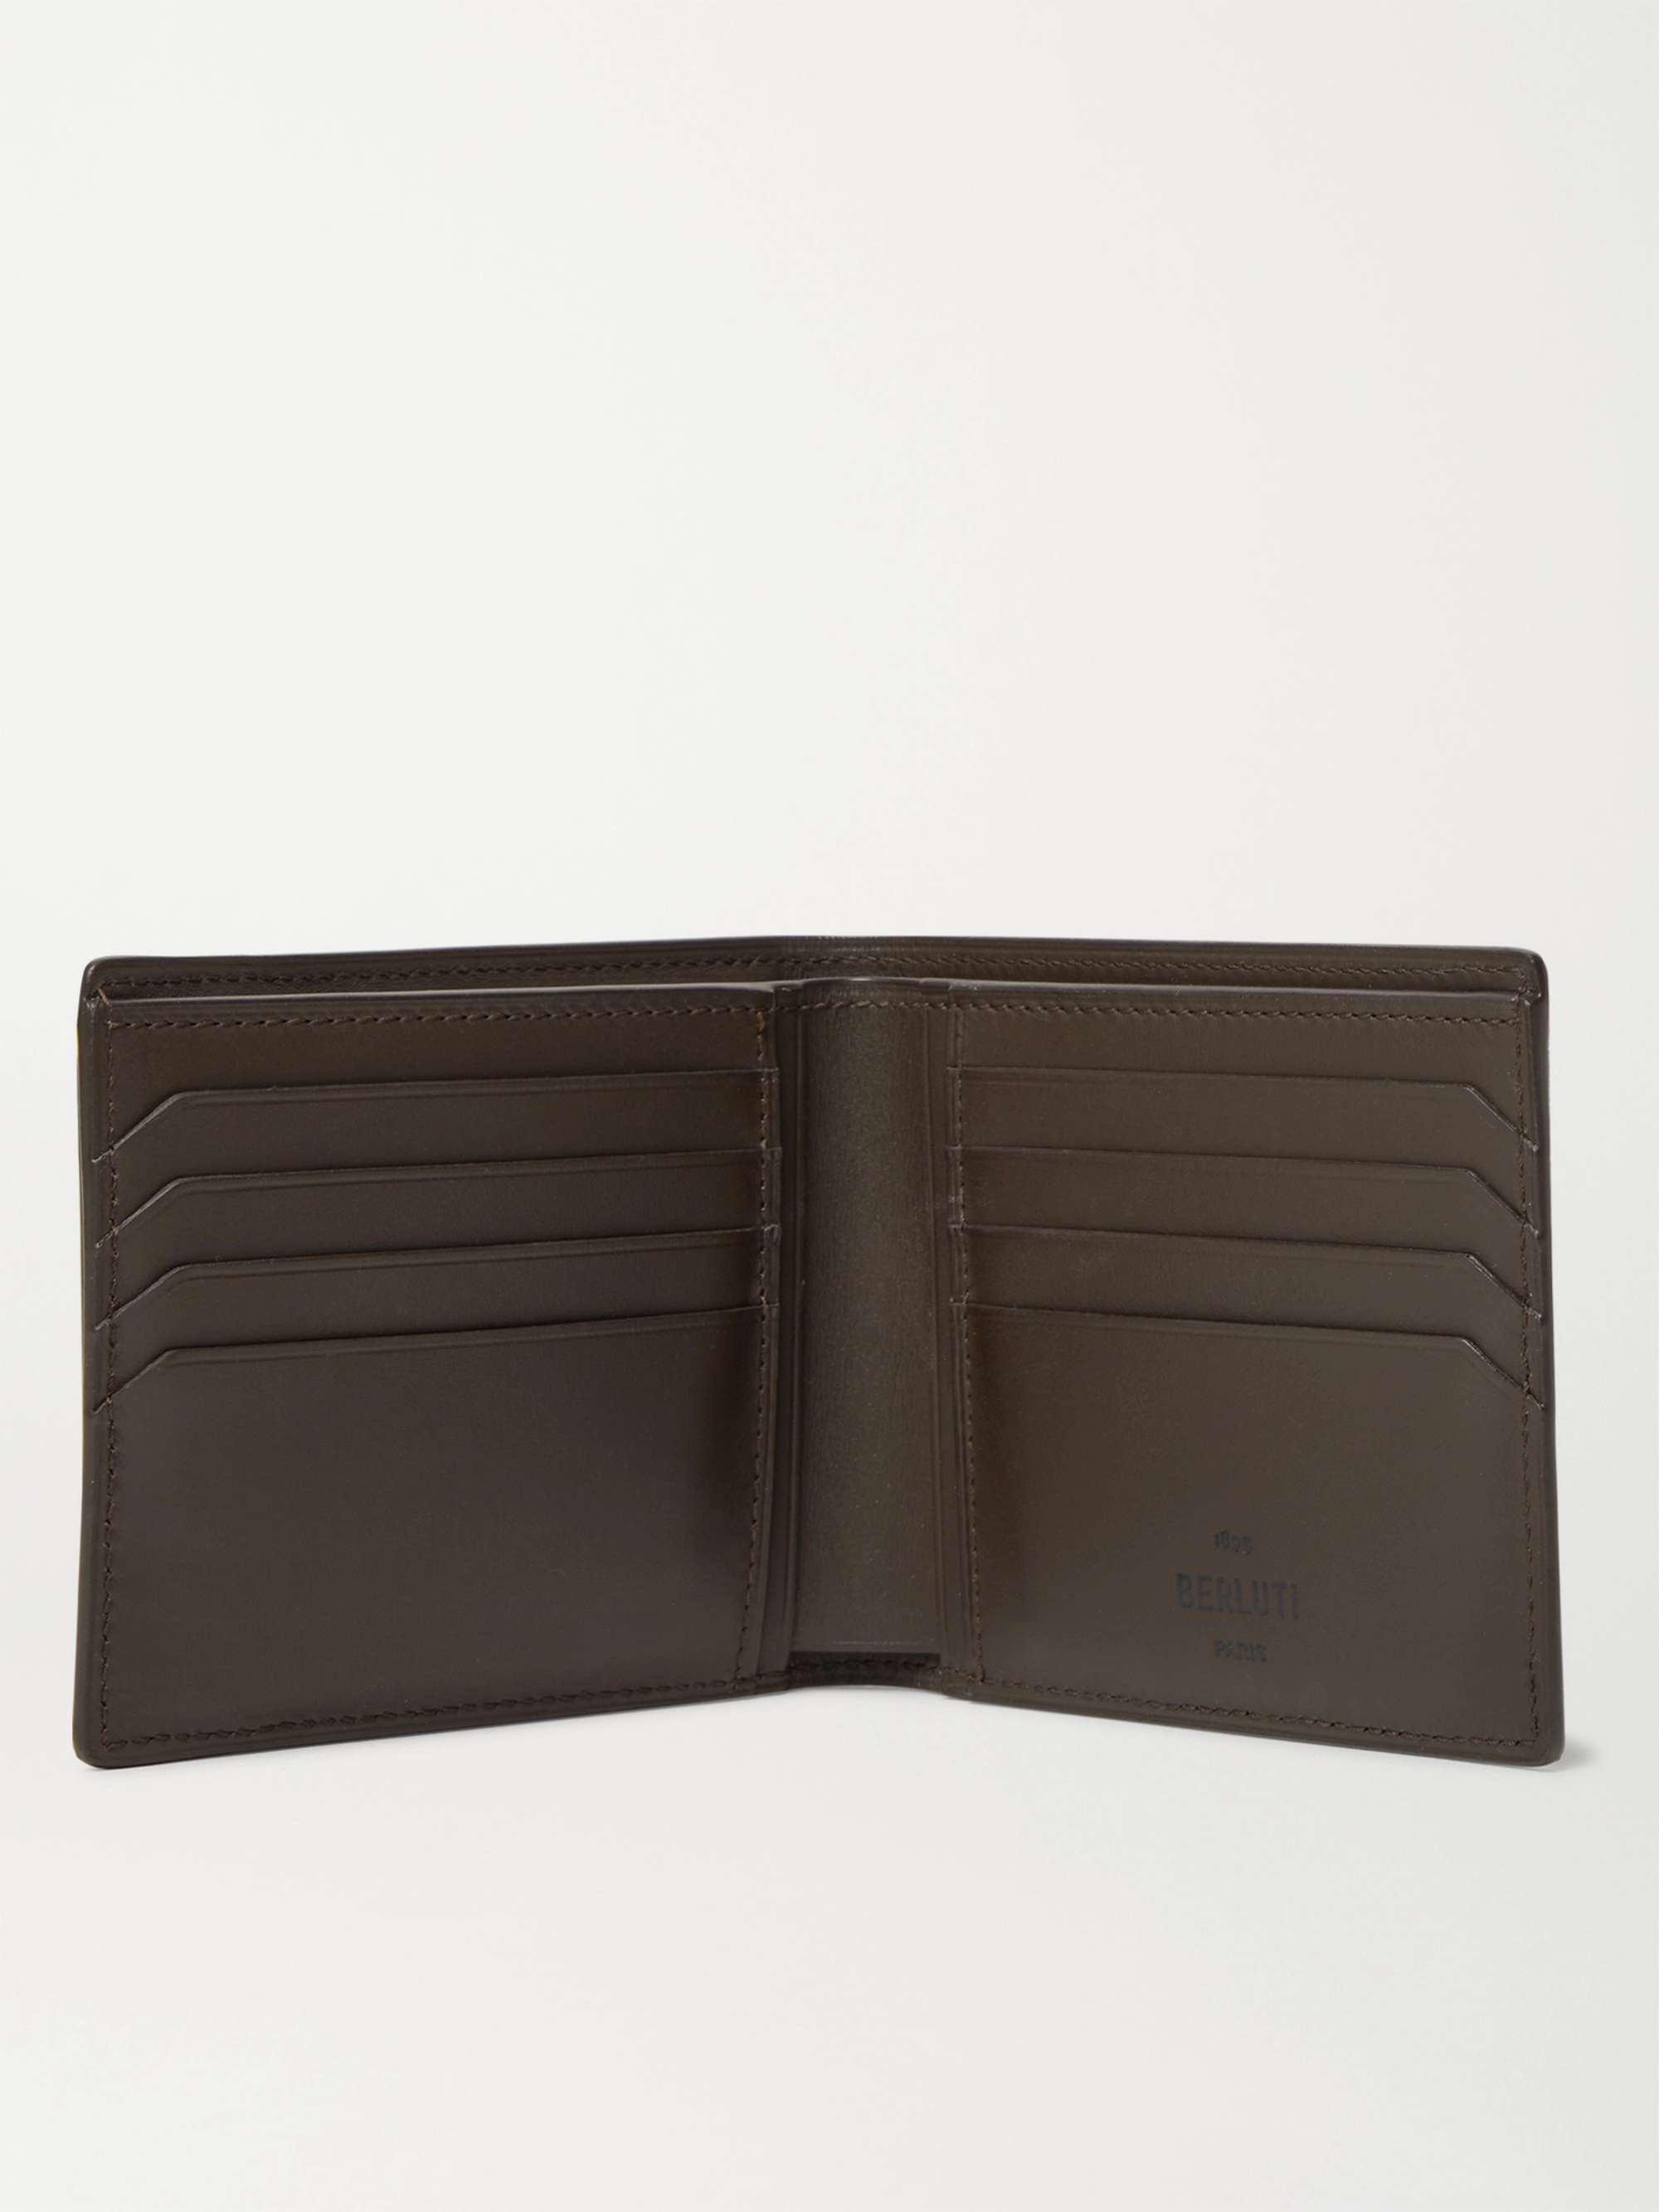 BERLUTI Scritto Leather Billfold Wallet with Cardholder